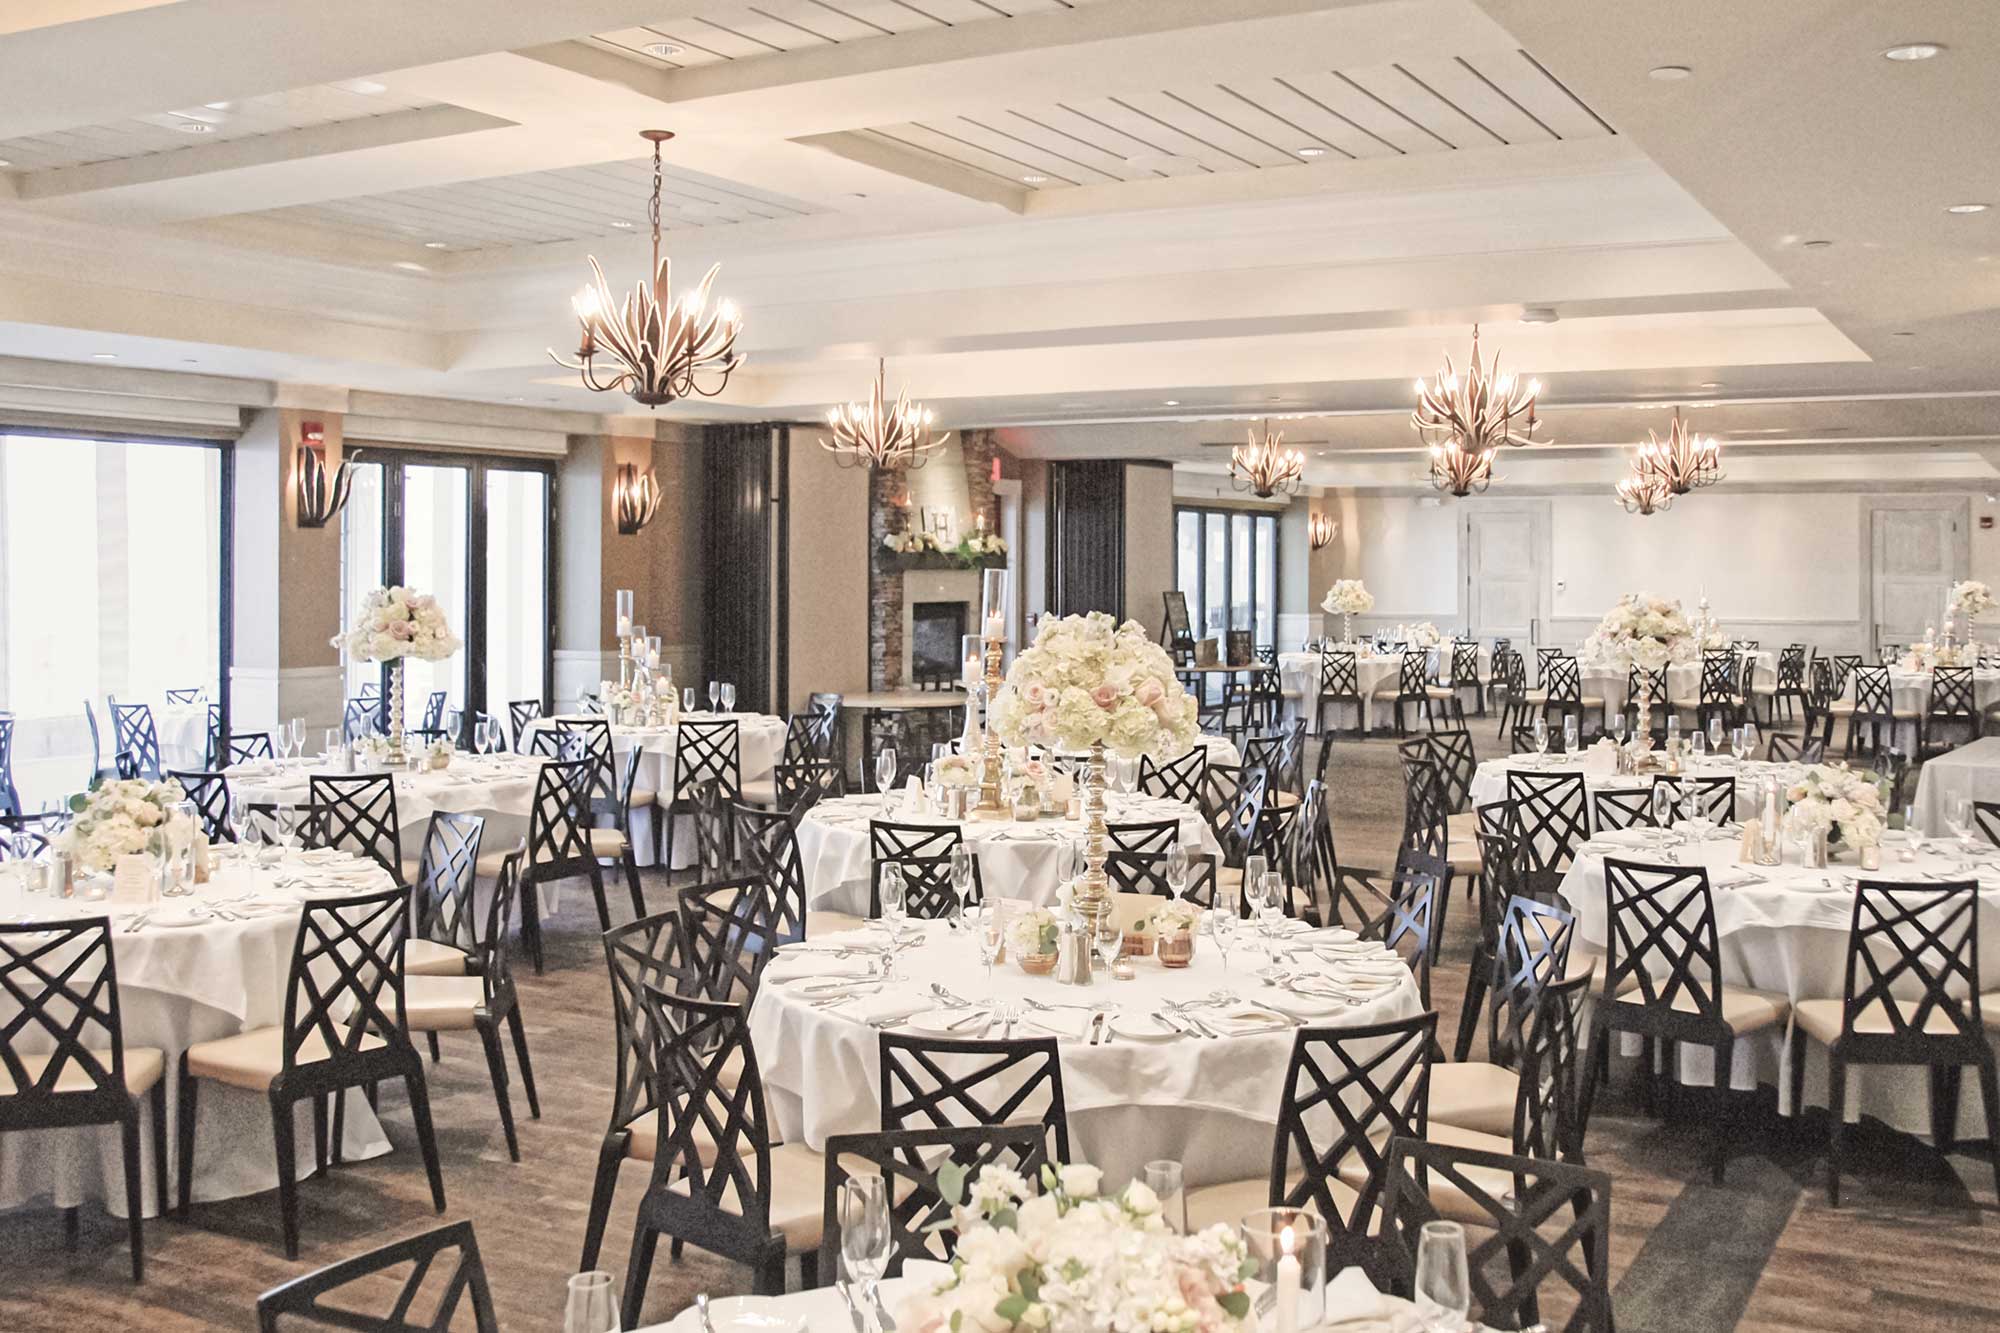 New Wedding Venues: The Reeds at Shelter Haven Resort